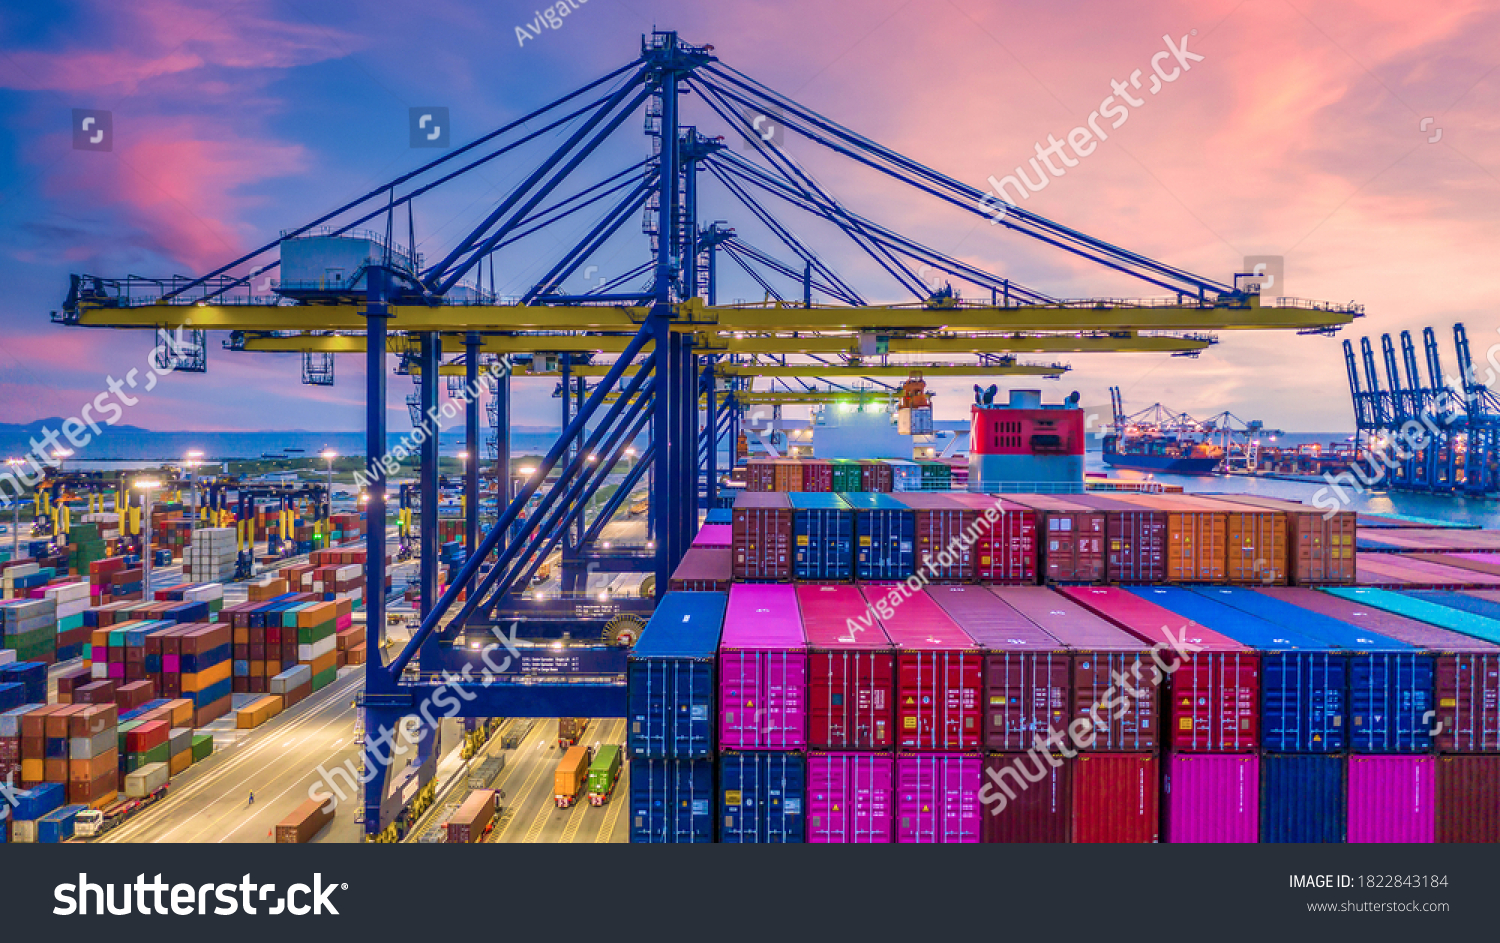 Container ship in deep sea port at night, Global business logistic import export freight shipping transportation oversea worldwide container ship, Container vessel loading cargo freight ship. #1822843184